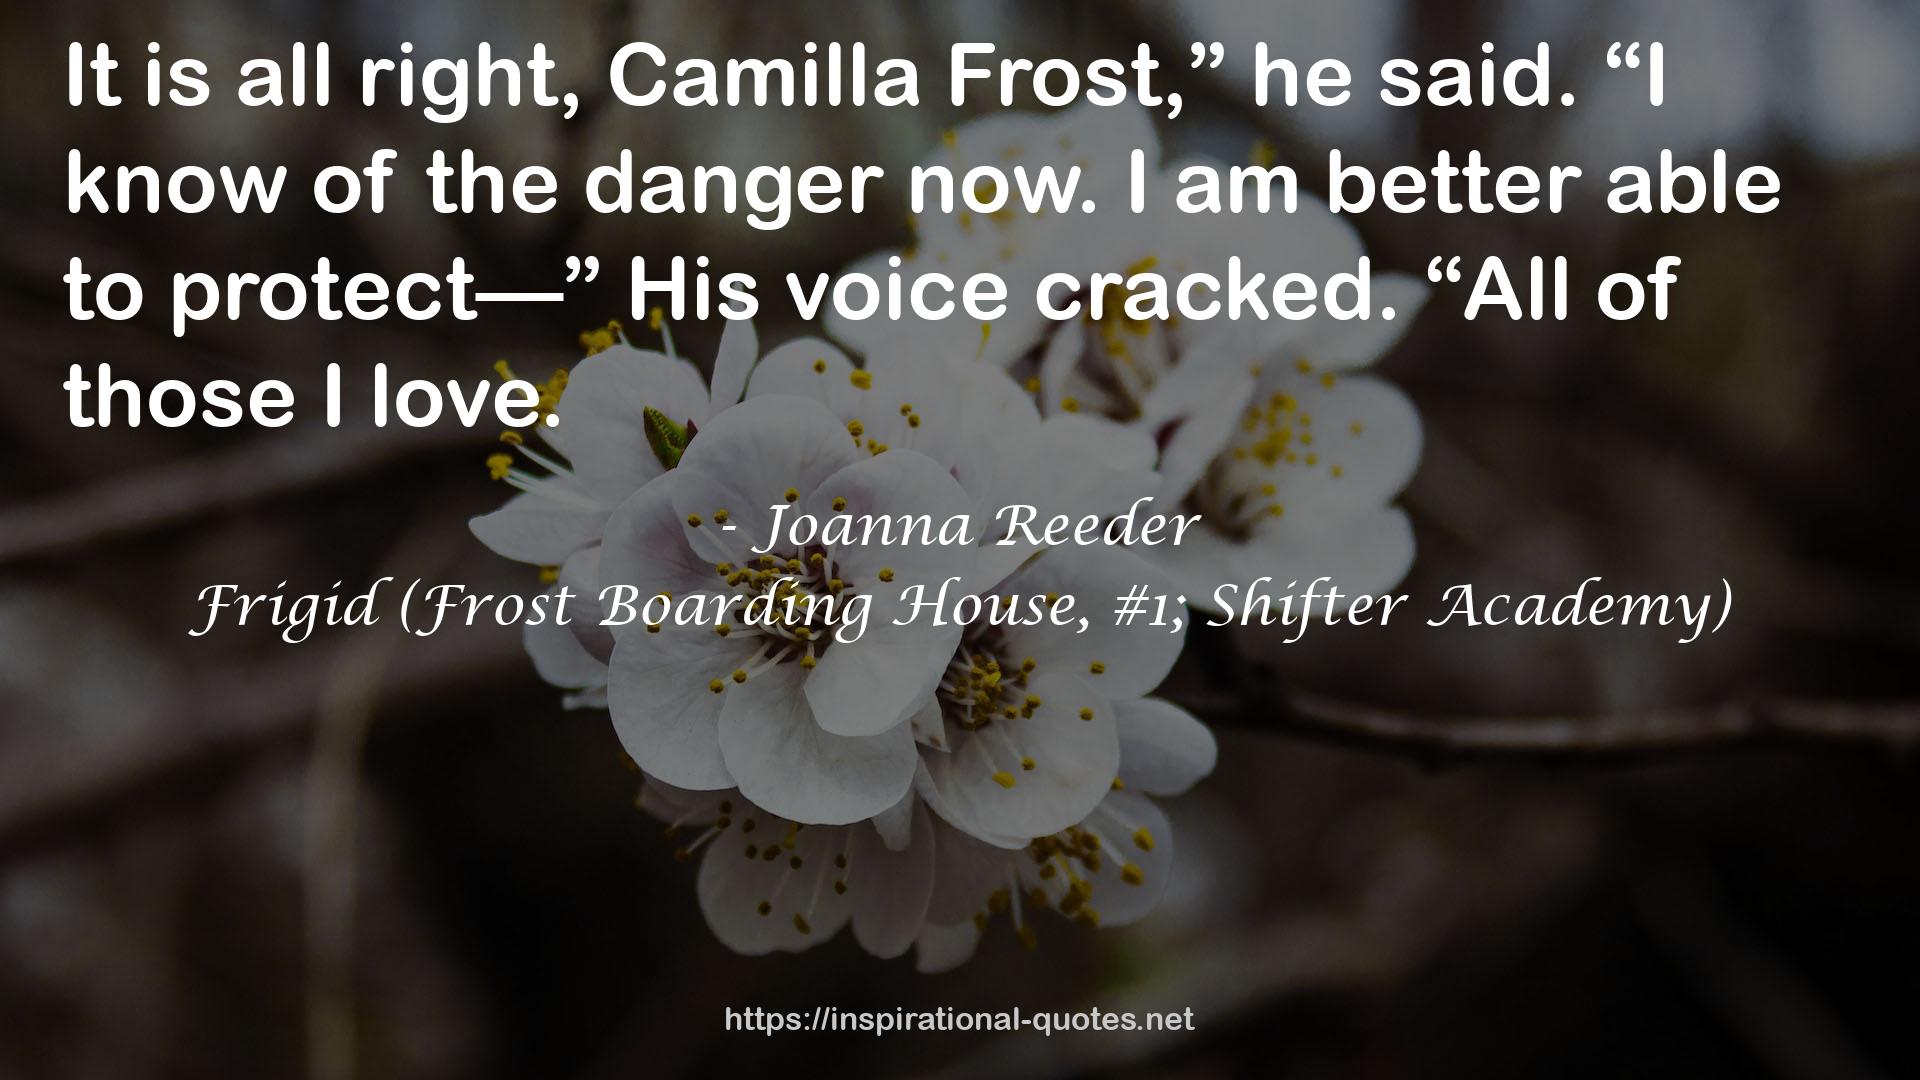 Frigid (Frost Boarding House, #1; Shifter Academy) QUOTES